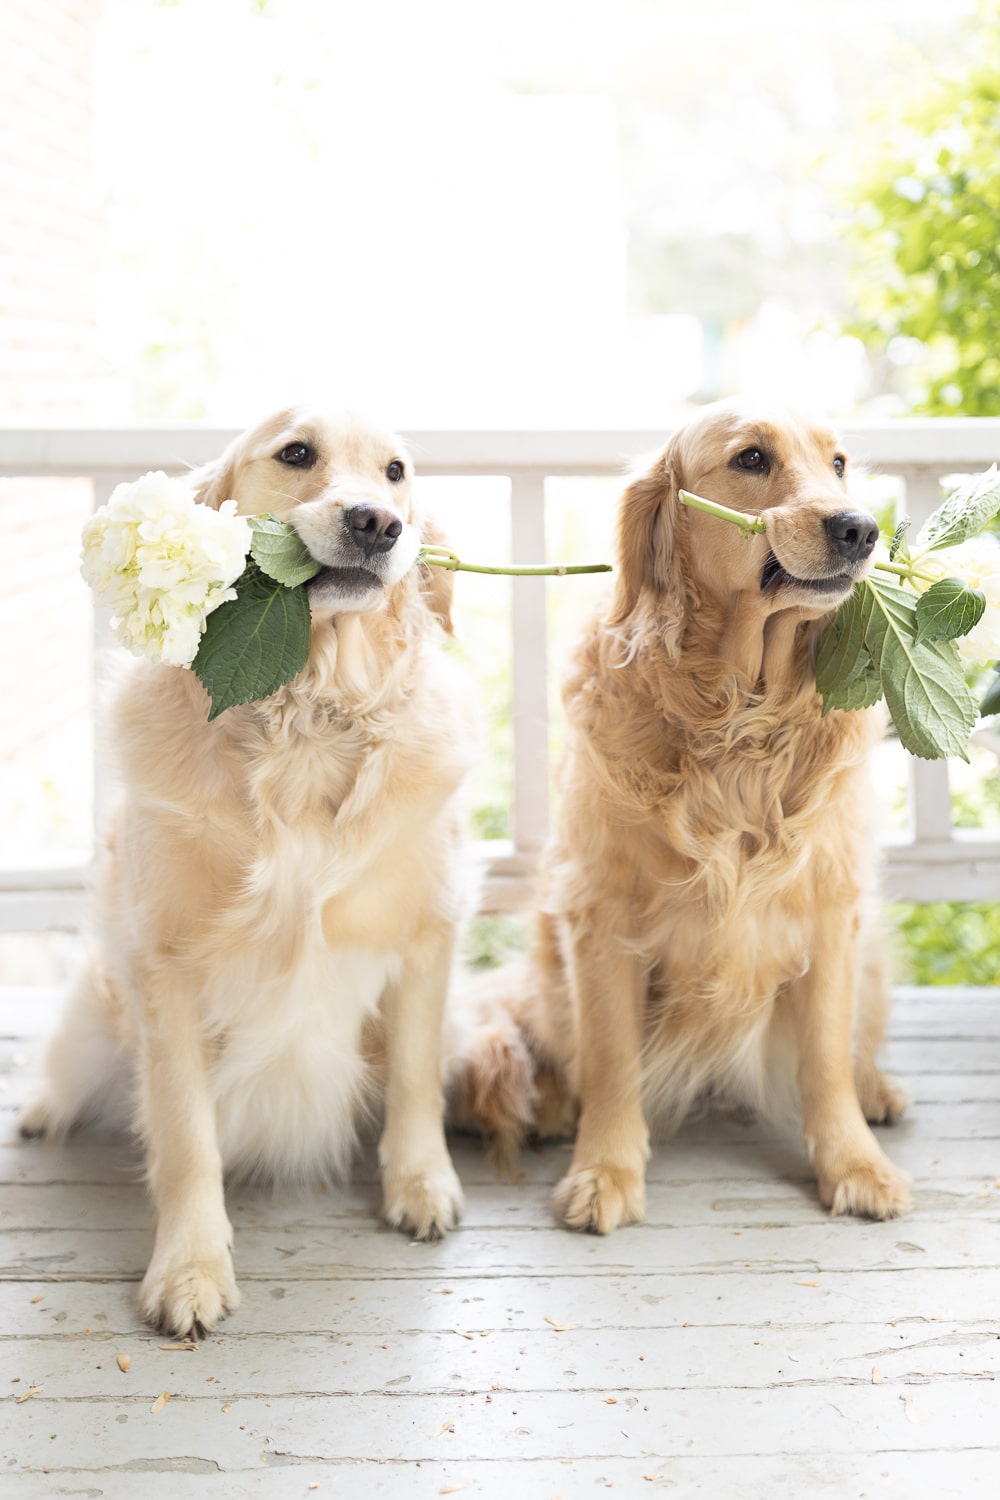 Cute golden retrievers holding flowers in their mouths on Diary of a Debutante